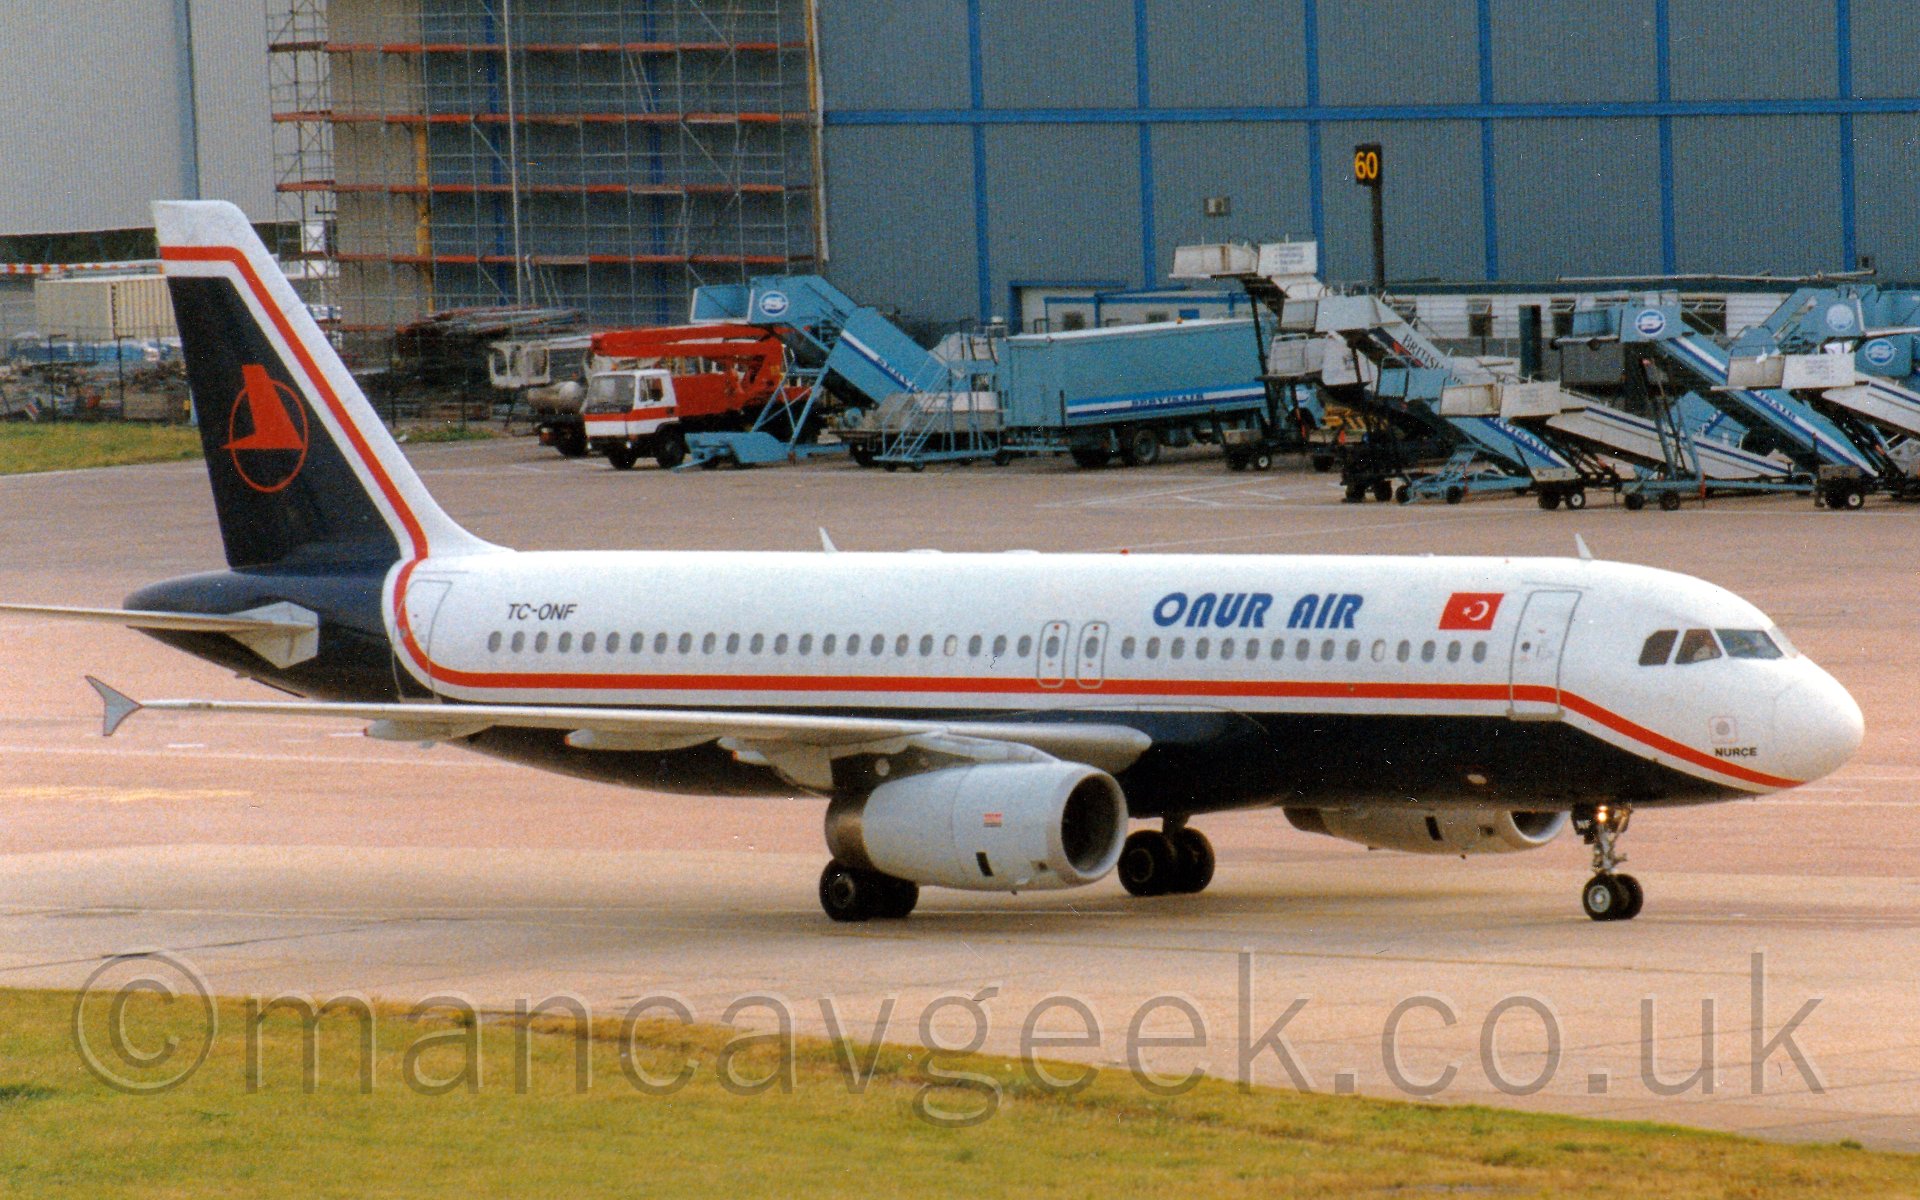 Side view of a twin engined jet airliner taxiing from left to right. The plane is mostly white, with a deep blue belly that sweeps up to fill most of the rear of the tail, and a red cheatlin running along the body from under the nose and up into the tail, seperating the 2 colours. There are pale blue "Onur Air" titles on the upper forward fuselage, just aft of a Turkish flag (red field with a white star in the center and white crescent offset it the right), and the registration "TC-ONF" on the upper rear fuselage in black. The tail has the red outline of a circle, containing a stylised image of a red flying bird. In the background, a large blue hangar dominates the rest of the frame, with various airstairs, trucks, trailers, and cranes parked randomly in front.